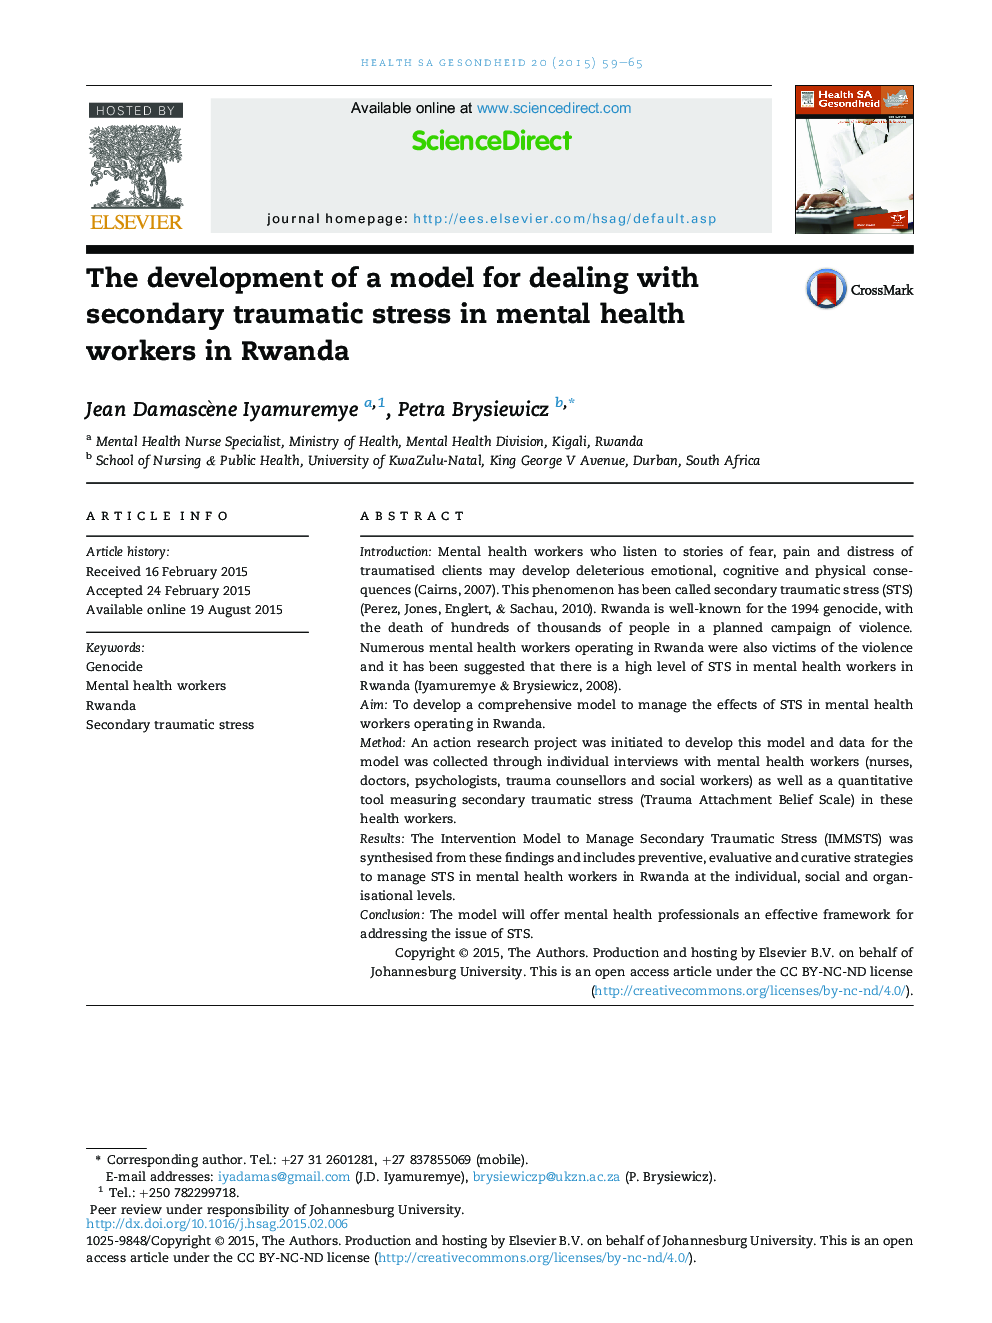 The development of a model for dealing with secondary traumatic stress in mental health workers in Rwanda 